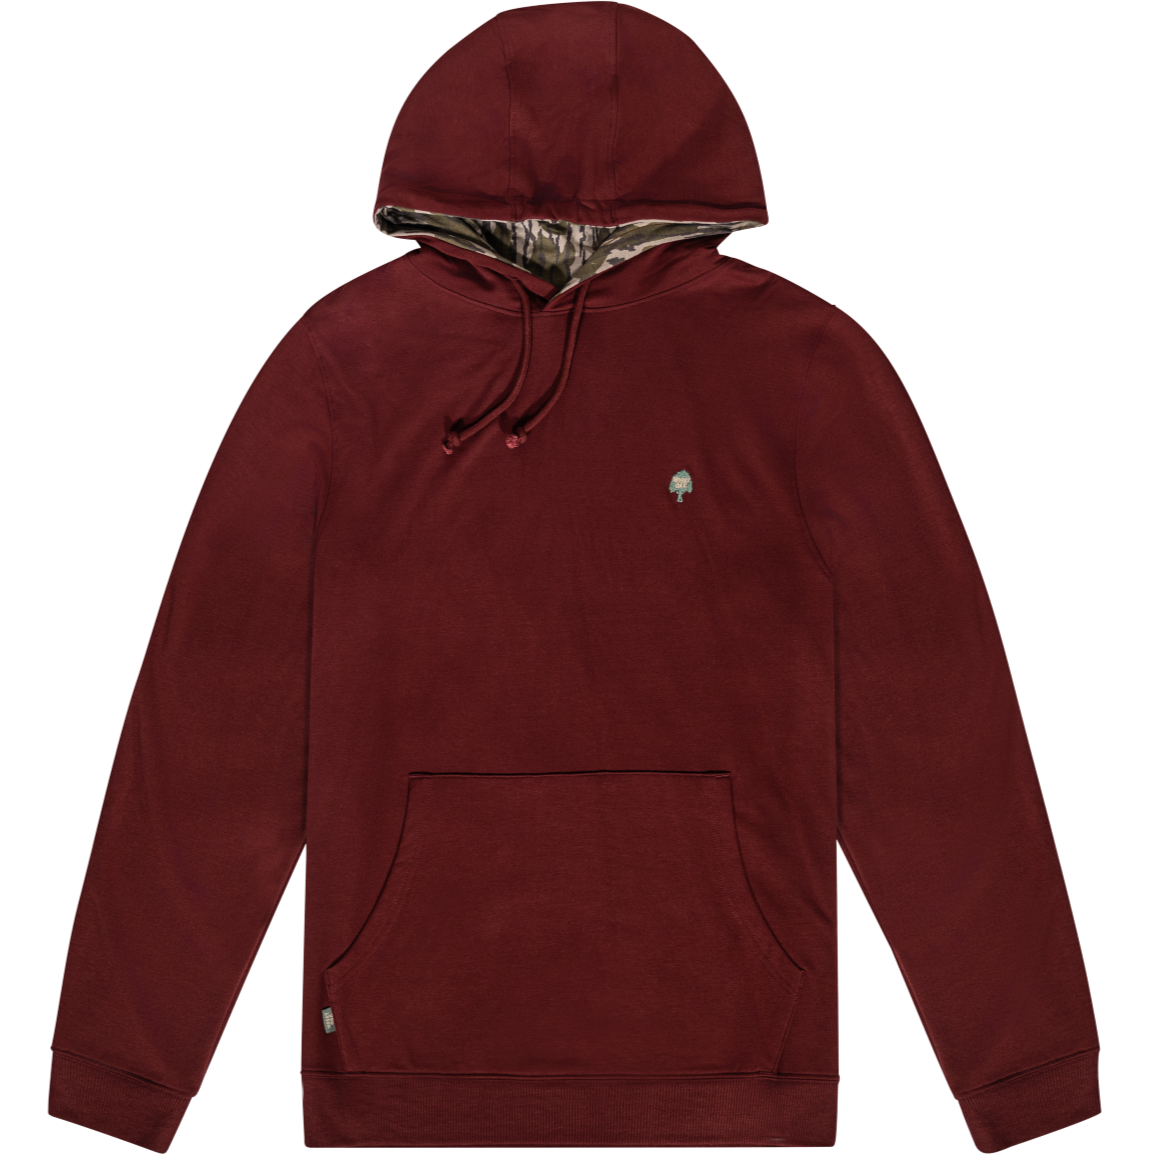 Tombigbee Bamboo Midweight Hoodie - Mulberry 